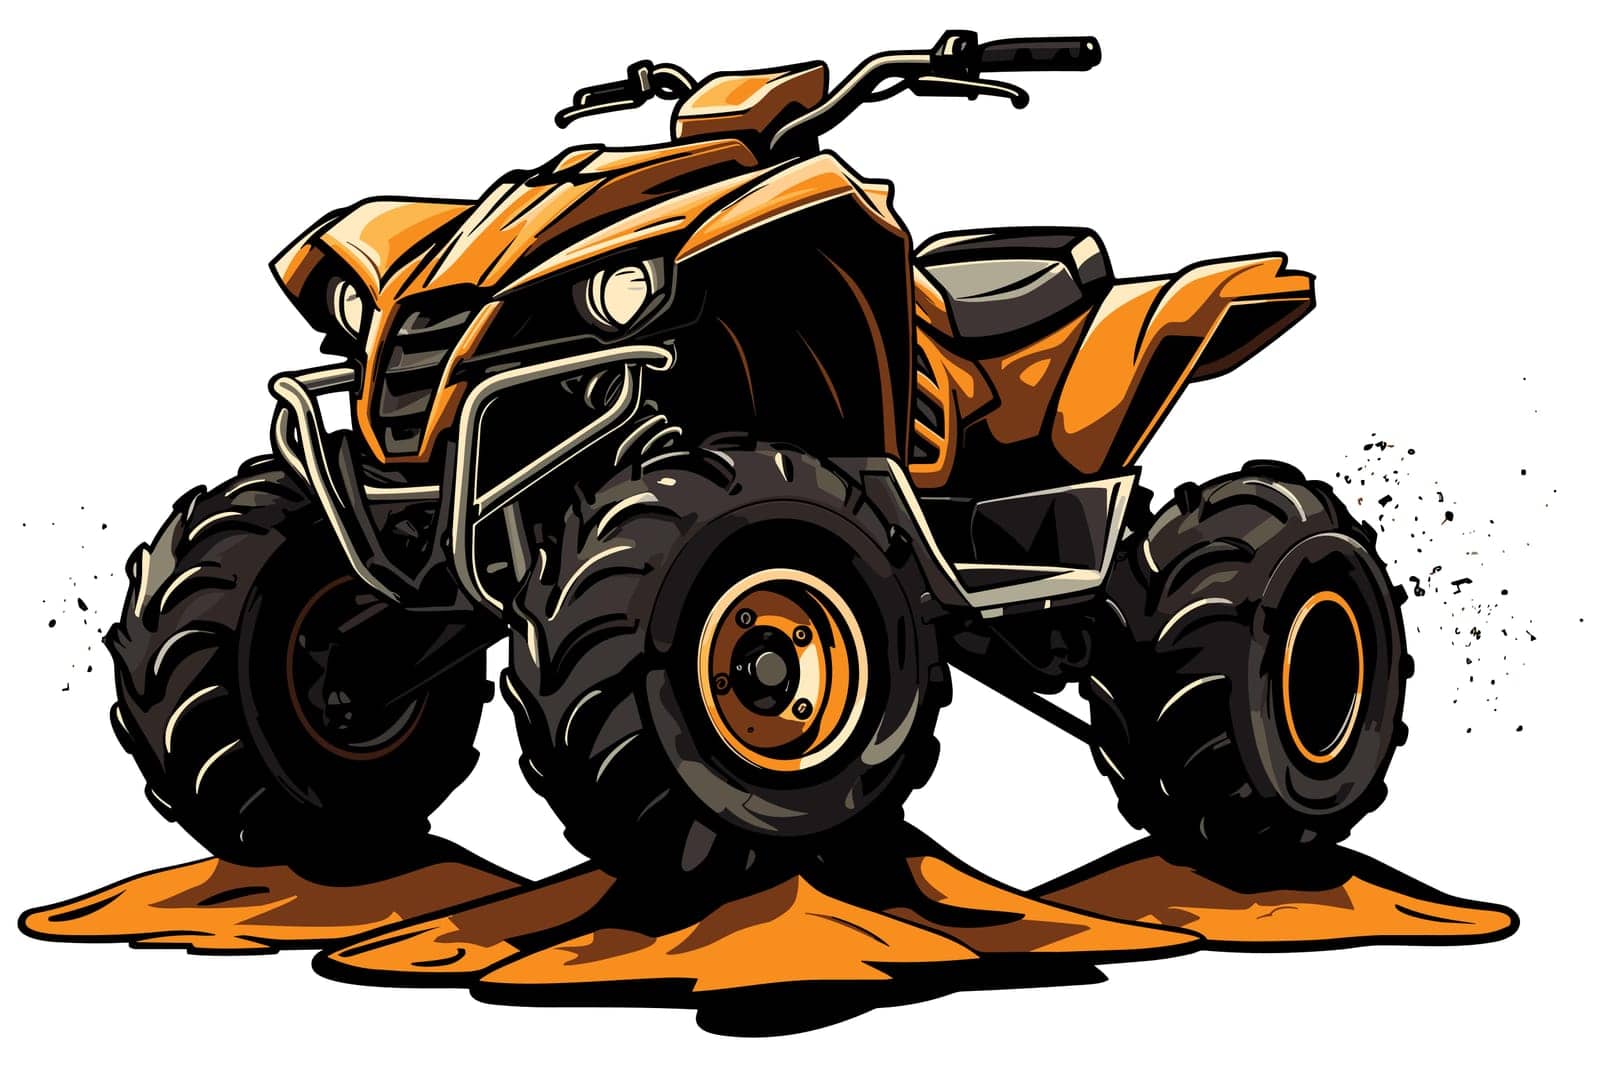 Vibrant illustration of orange all-terrain vehicle on sand, posed against white background, ready for rugged adventures.